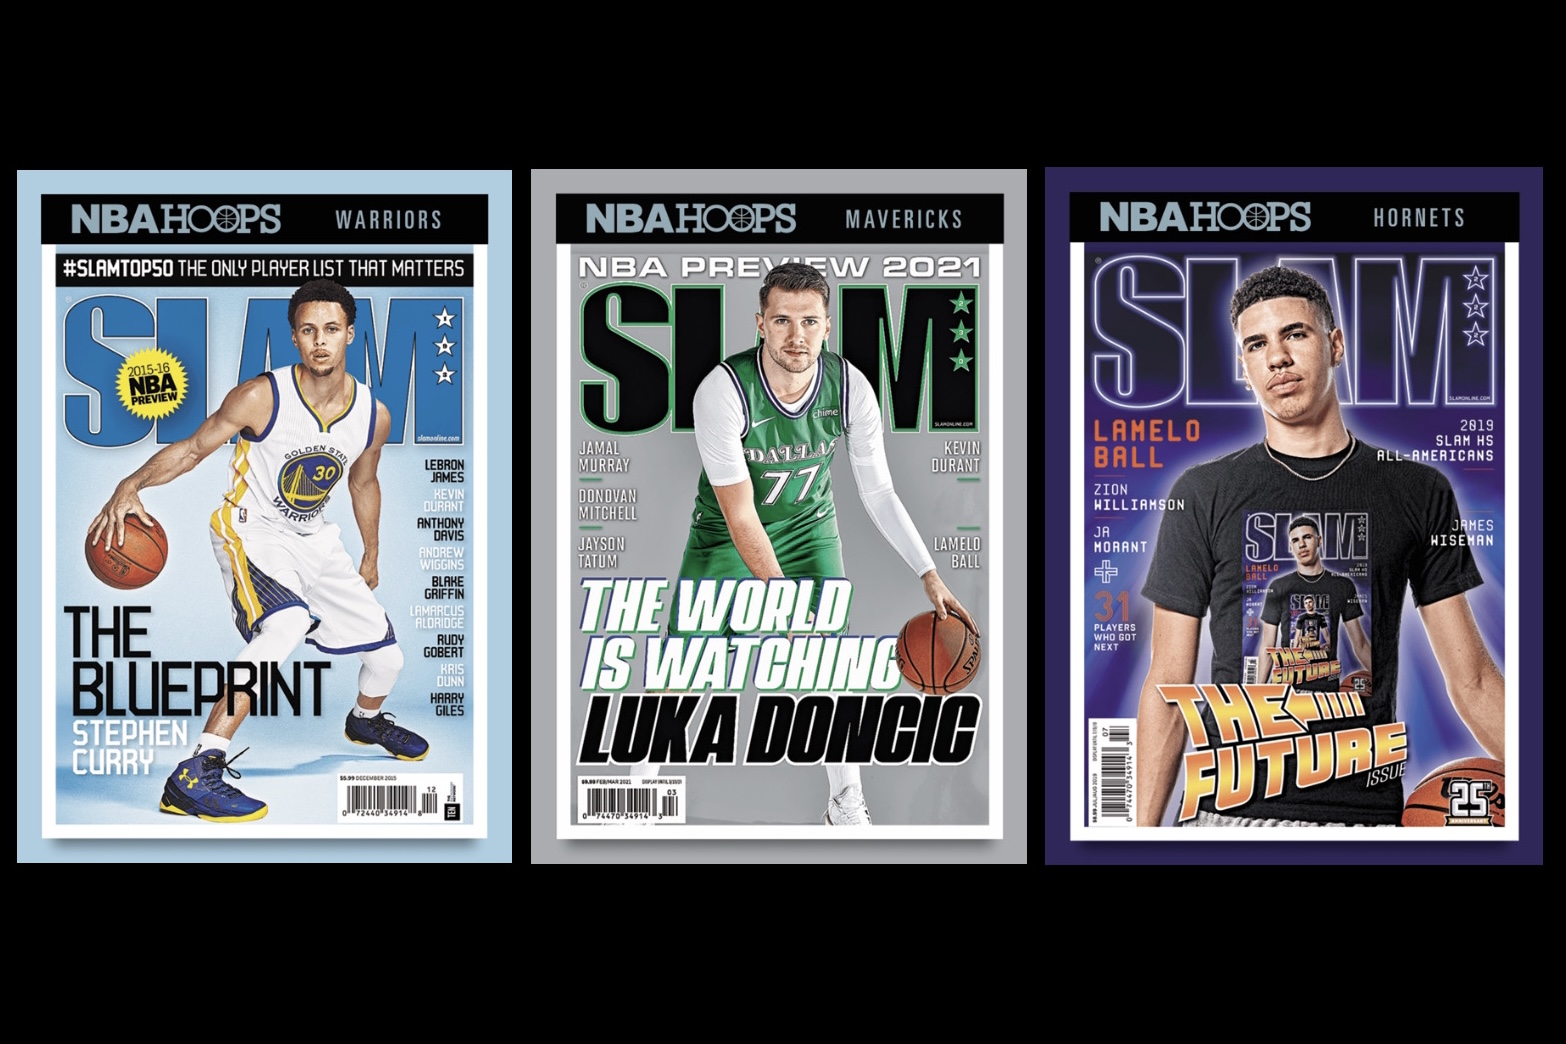 Panini America on X: Panini America is excited to be bringing back the  @SLAMonline Cover Cards in 2021-22 Hoops NBA Basketball retail products.  Head on over to the Panini Blog to see